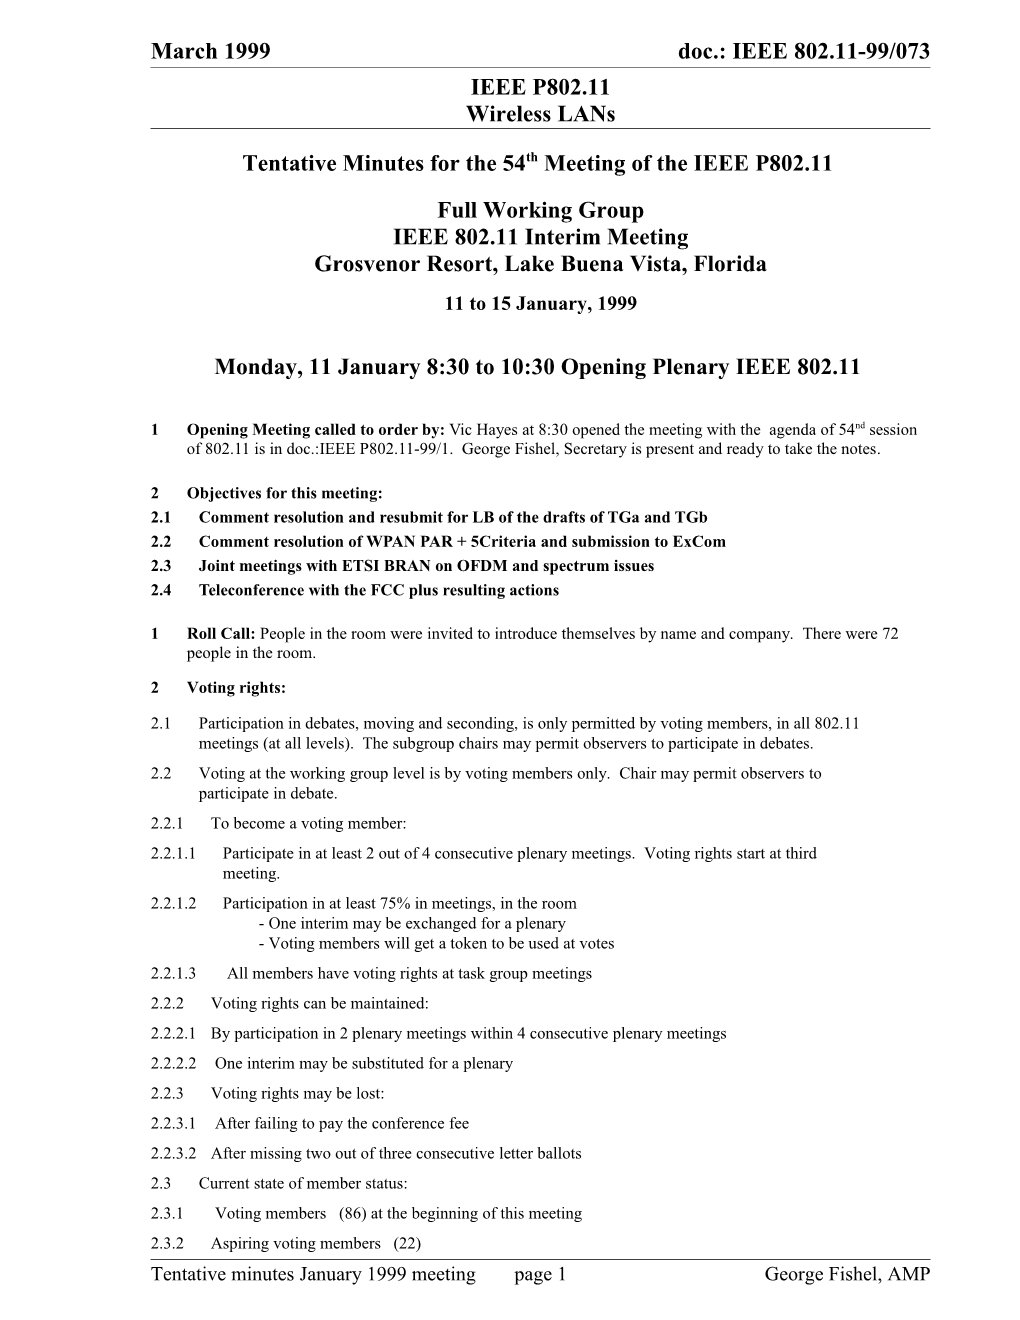 Tentative Minutes for the 54Th Meeting of the IEEE P802.11